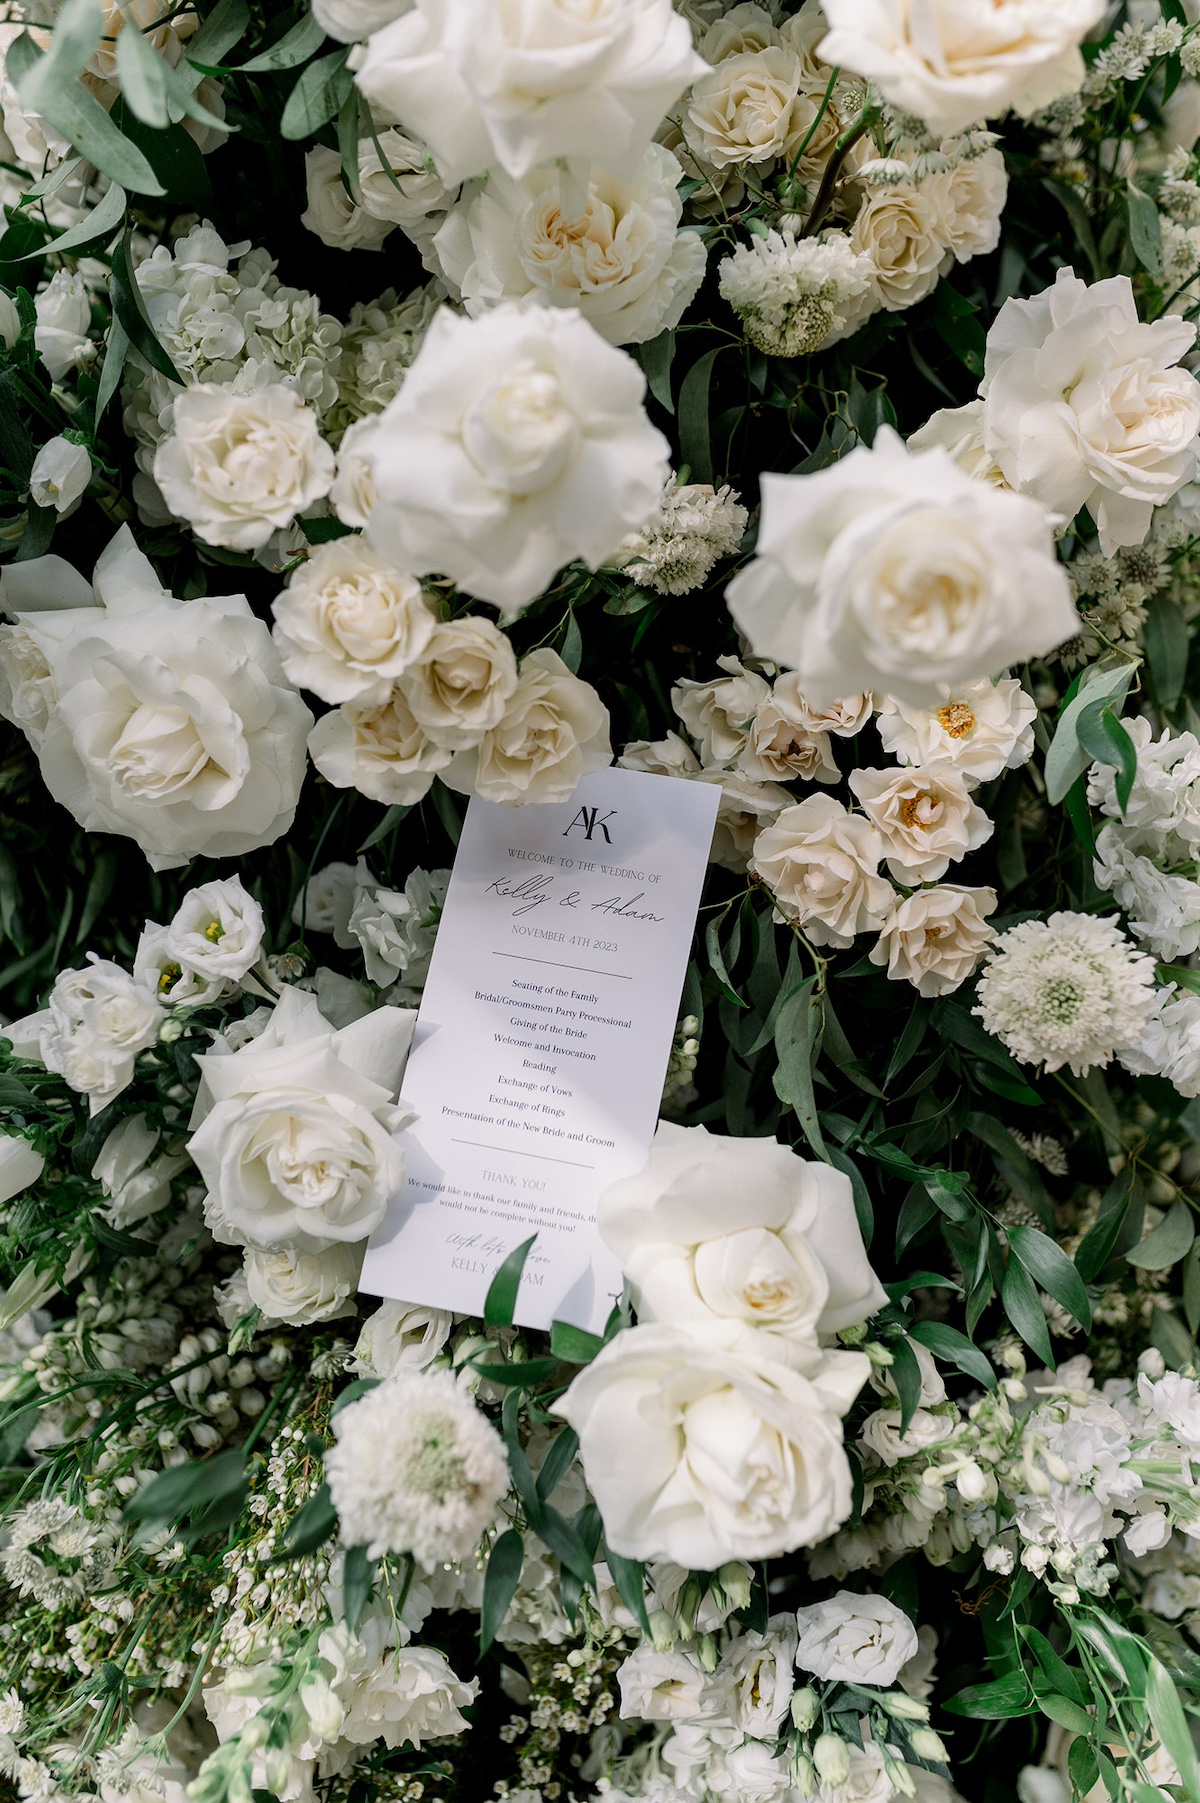 Close-up of Petals by Style's floral arrangements at Excelsior, showcasing the meticulous floral artistry that adorned the venue.